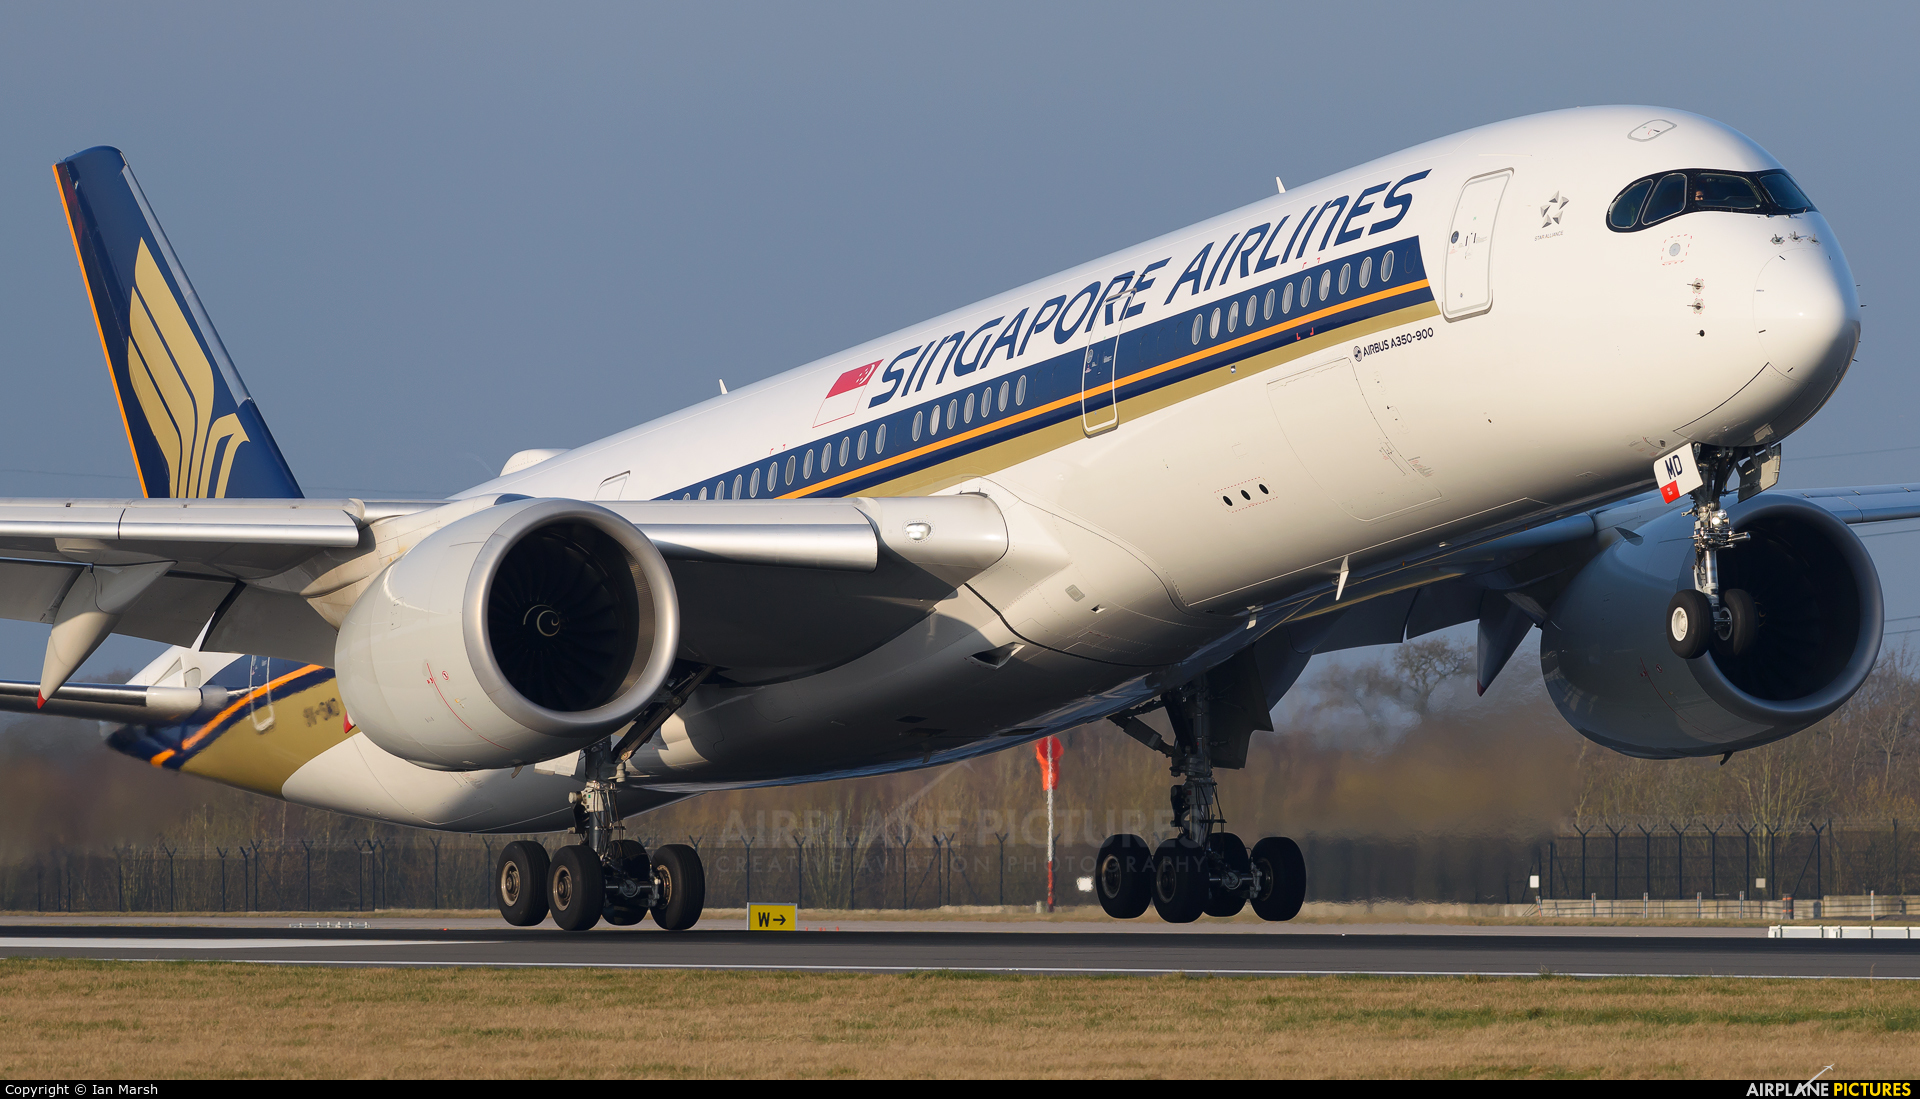 Singapore Airlines 9v-smd Aircraft At Manchester - A350 Landing - HD Wallpaper 